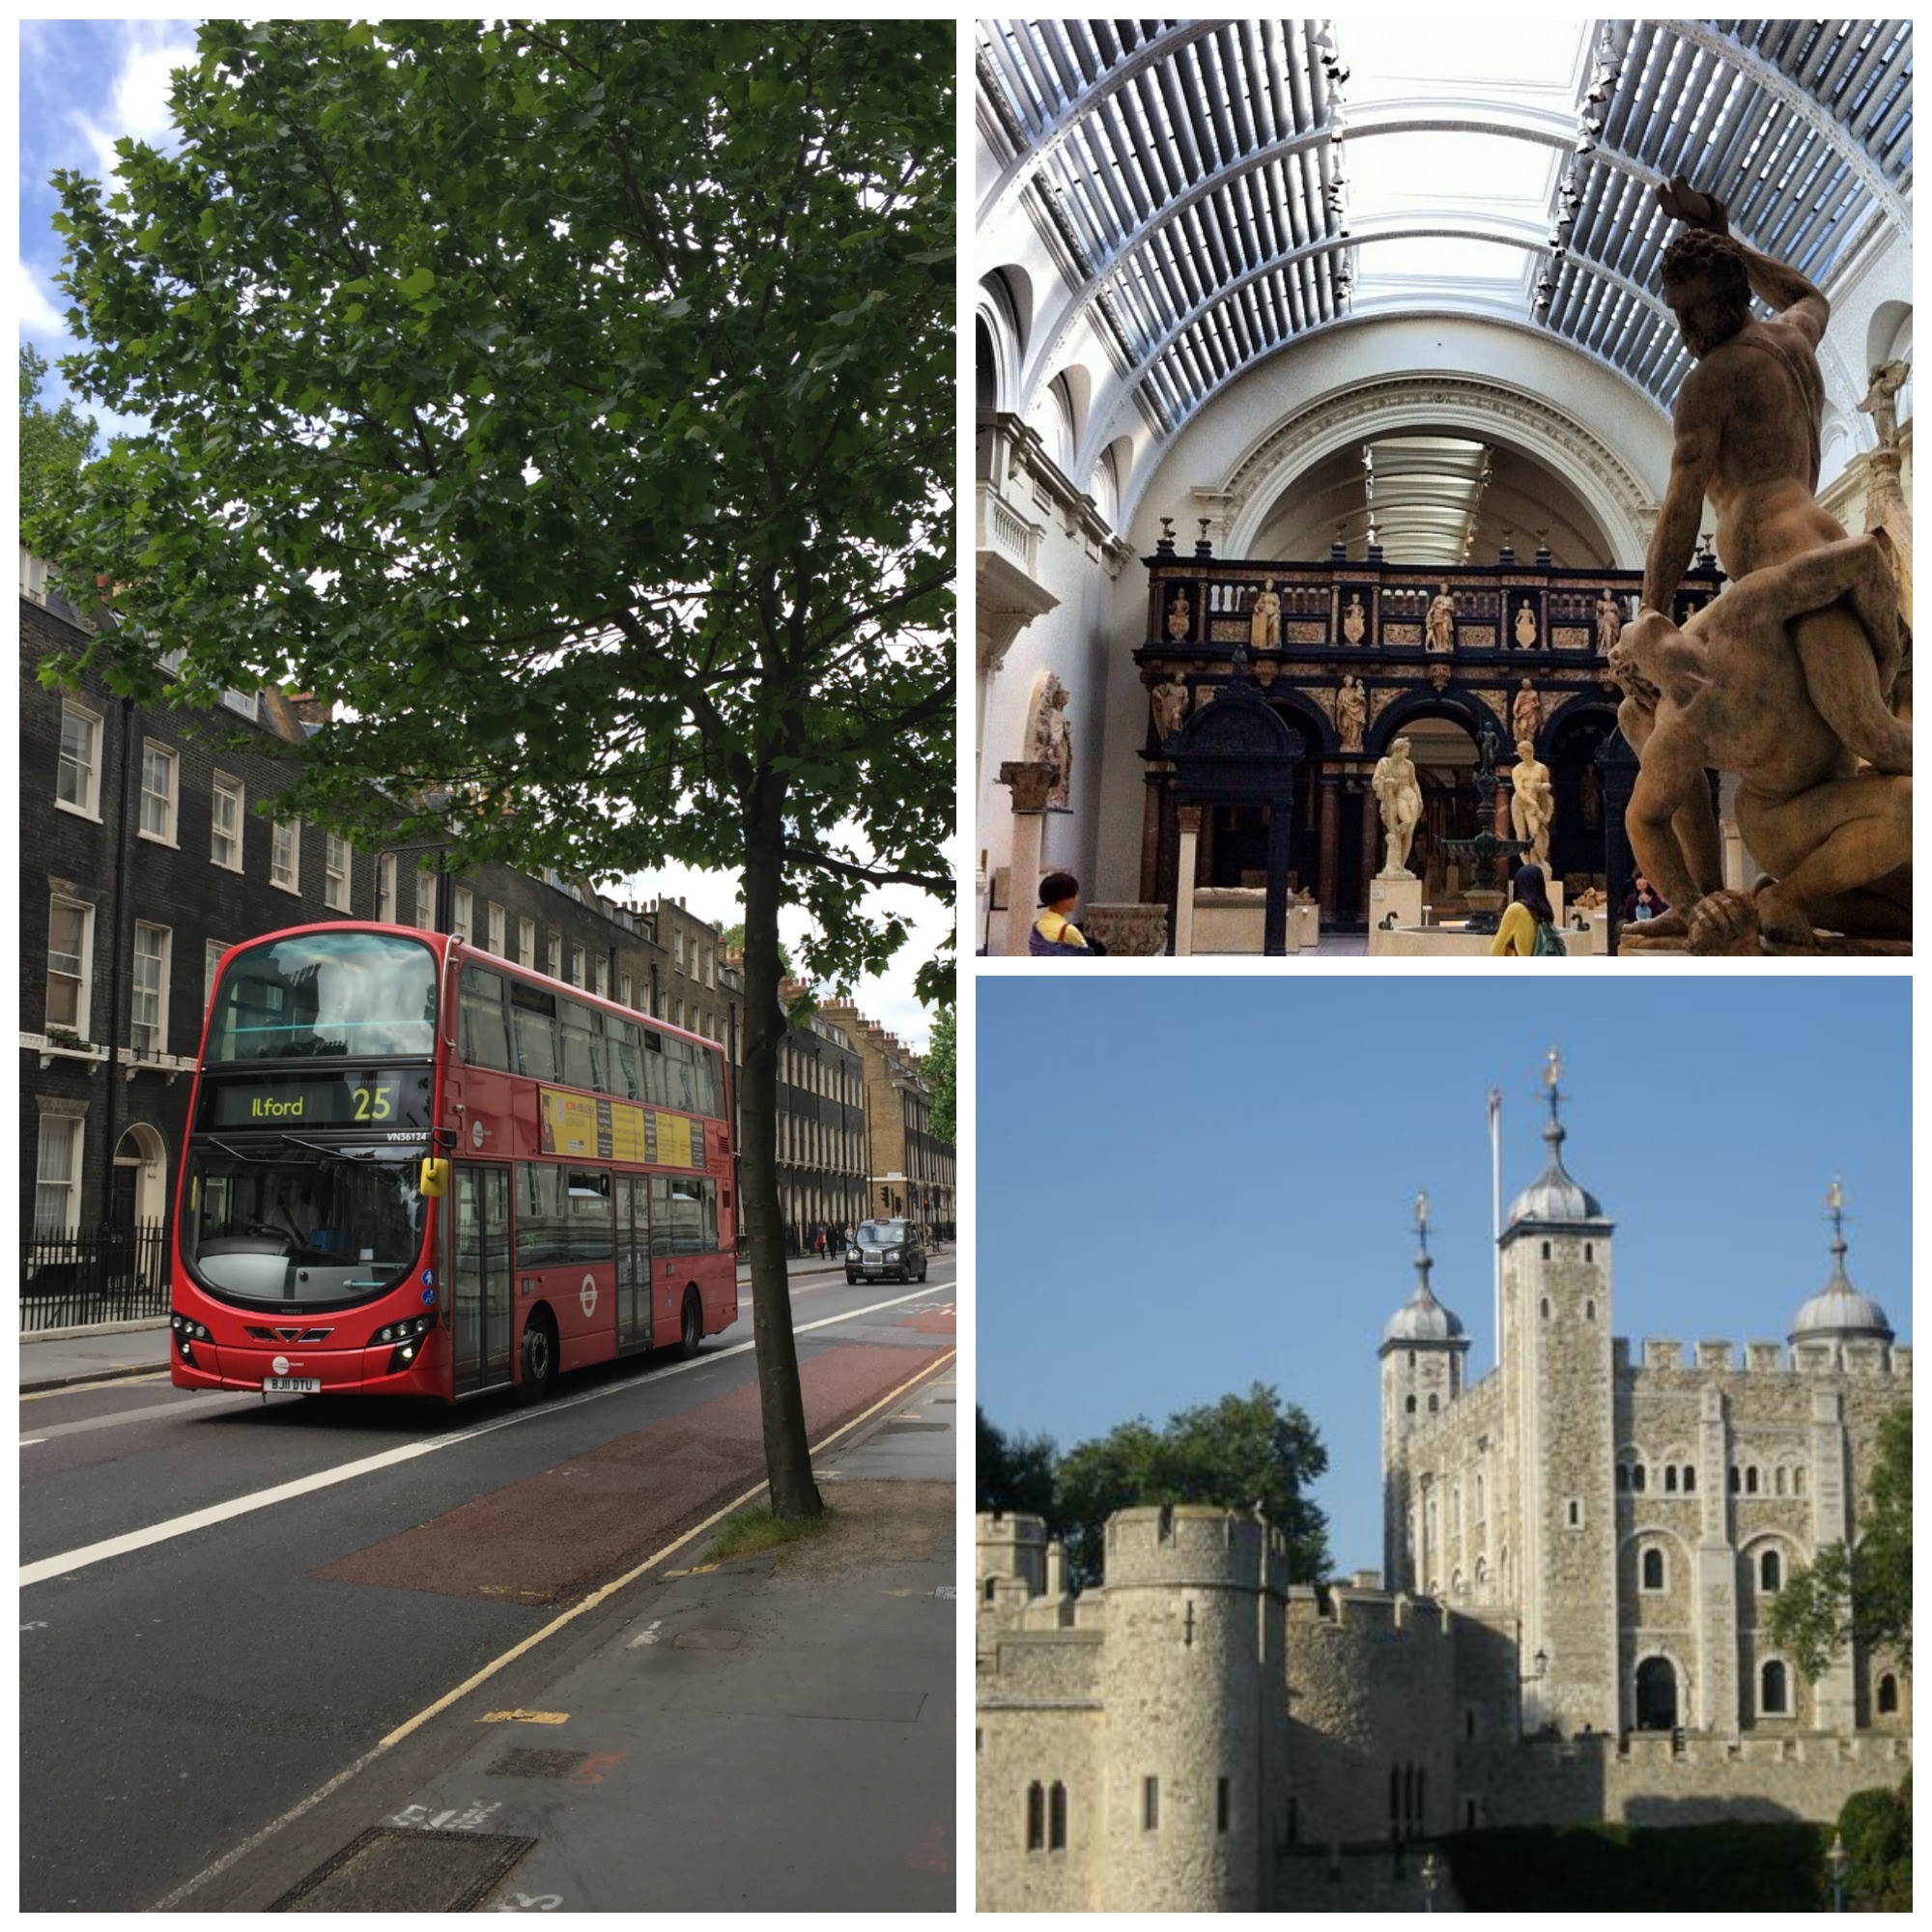 London location images, including a red double-decker bus, the Tate museum, and an English castle.